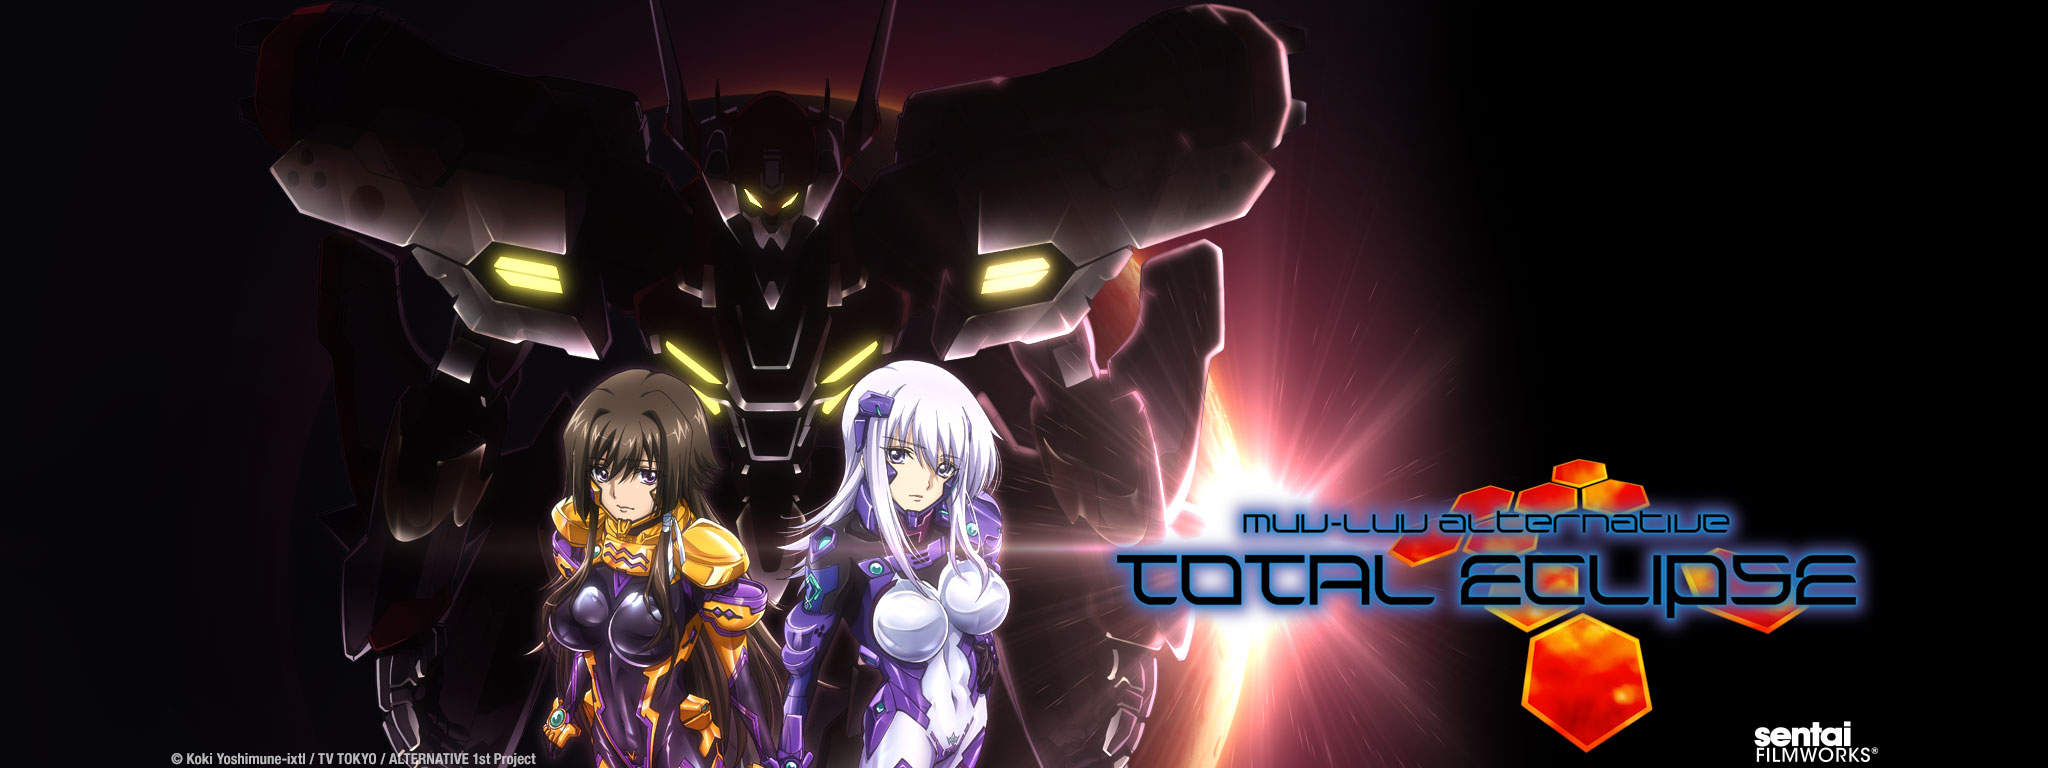 Title Art for Muv-Luv Alternative: Total Eclipse